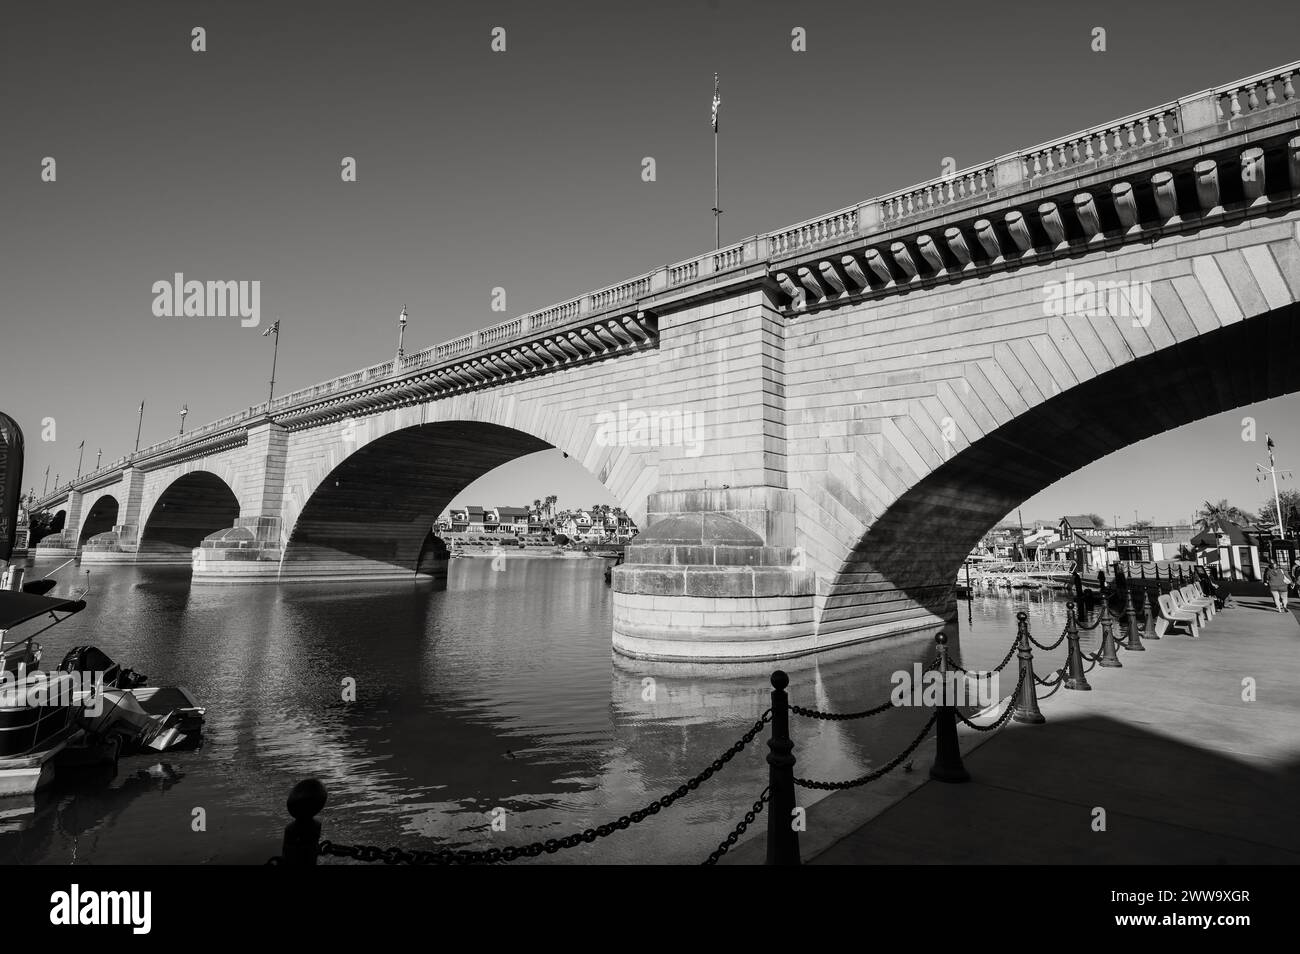 Tourists near the old London Bridge, which was relocated from London England in the 1970’s to Lake Havasu Arizona.  Black and white image. Stock Photo